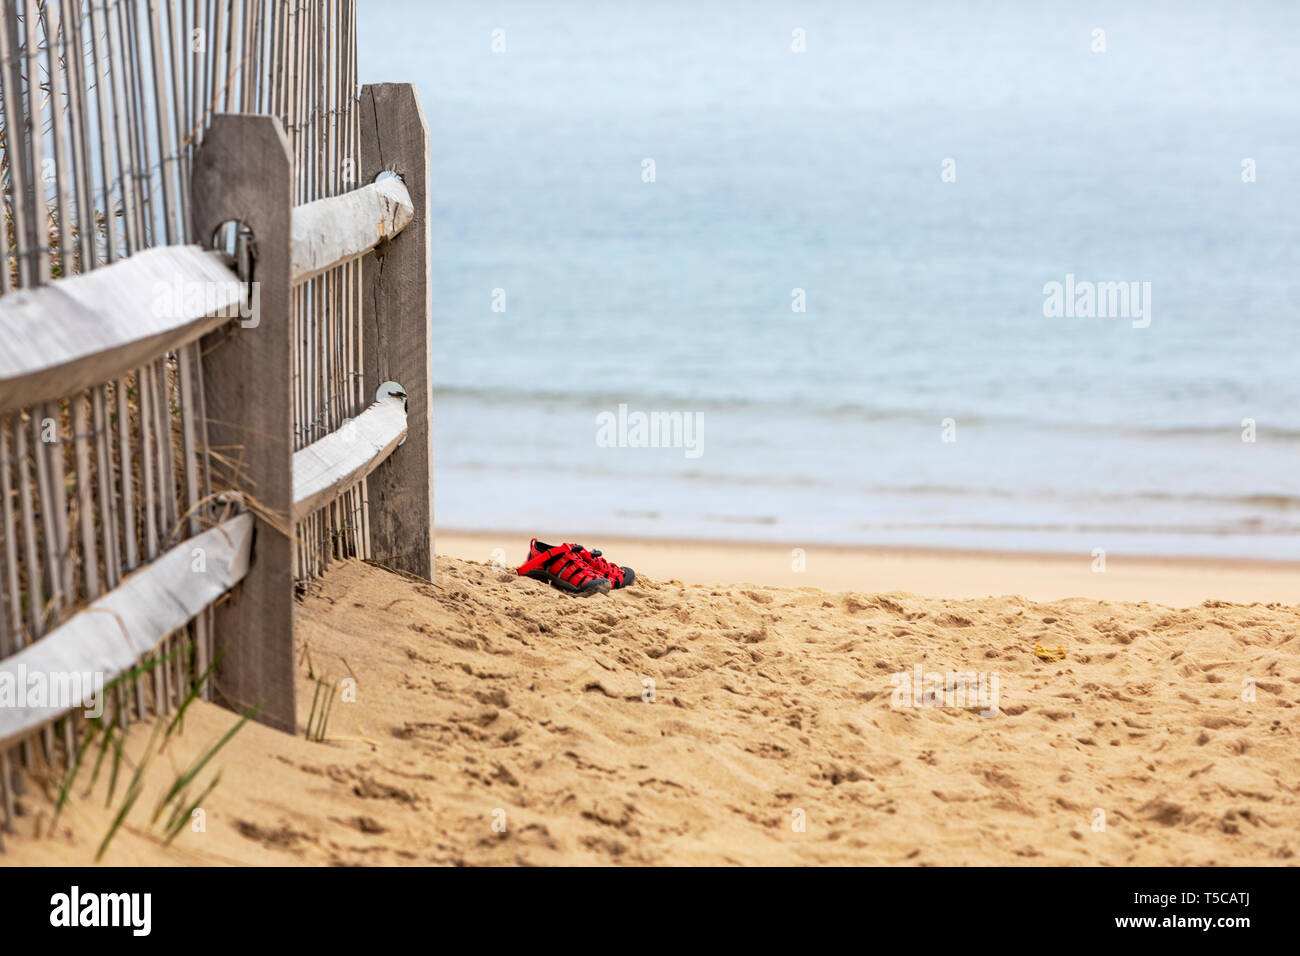 Sneakers on a deserted beach by the ocean without their owner. Stock Photo